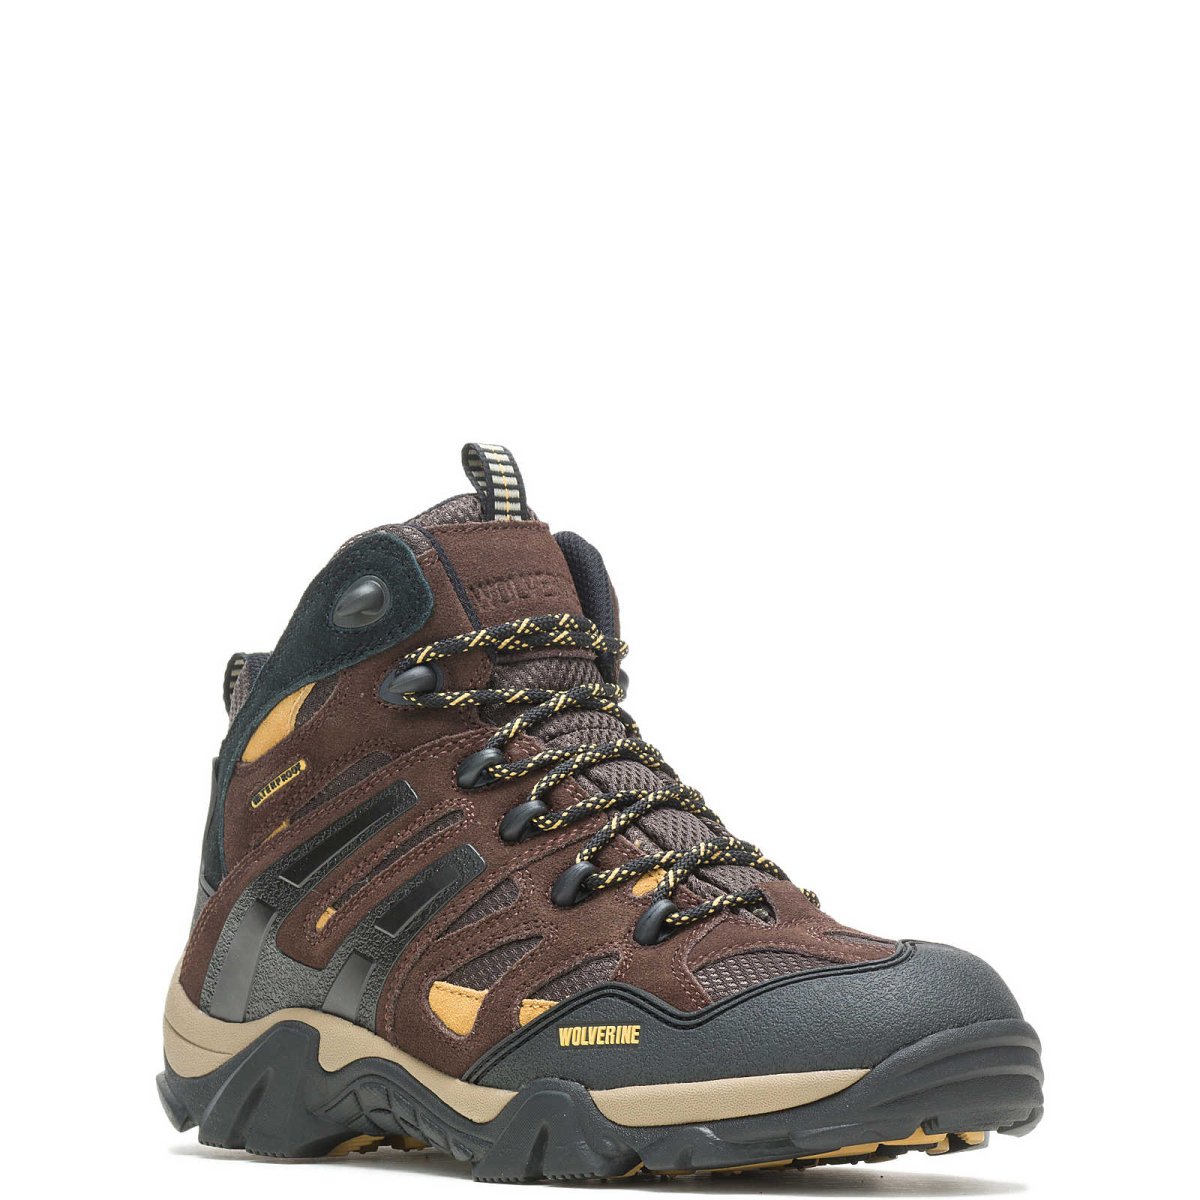 WOLVERINE WILDERNESS MEN'S WATERPROOF SOFT TOE BOOT (W880231) IN CHOCOLATE BROWN - TLW Shoes